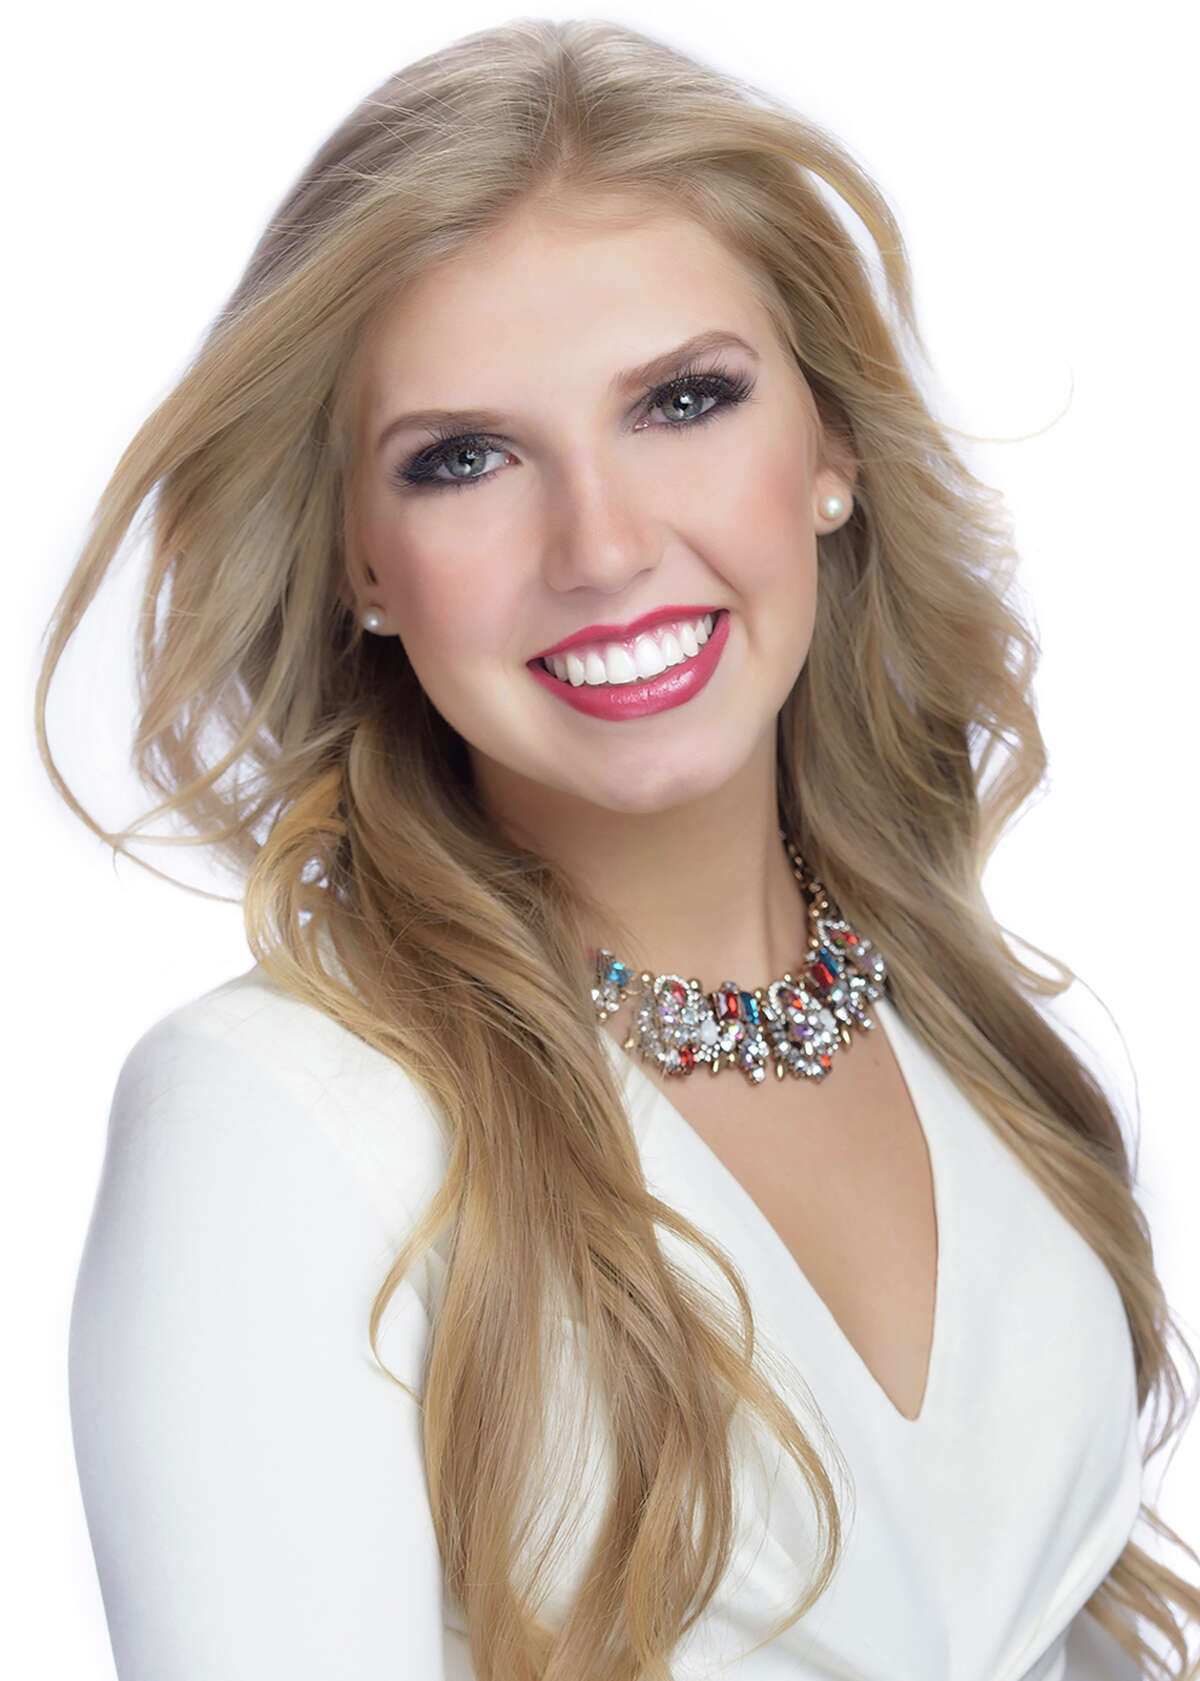 Competitor for Miss Teen Texas USAKinsley Cantrell - Tomball